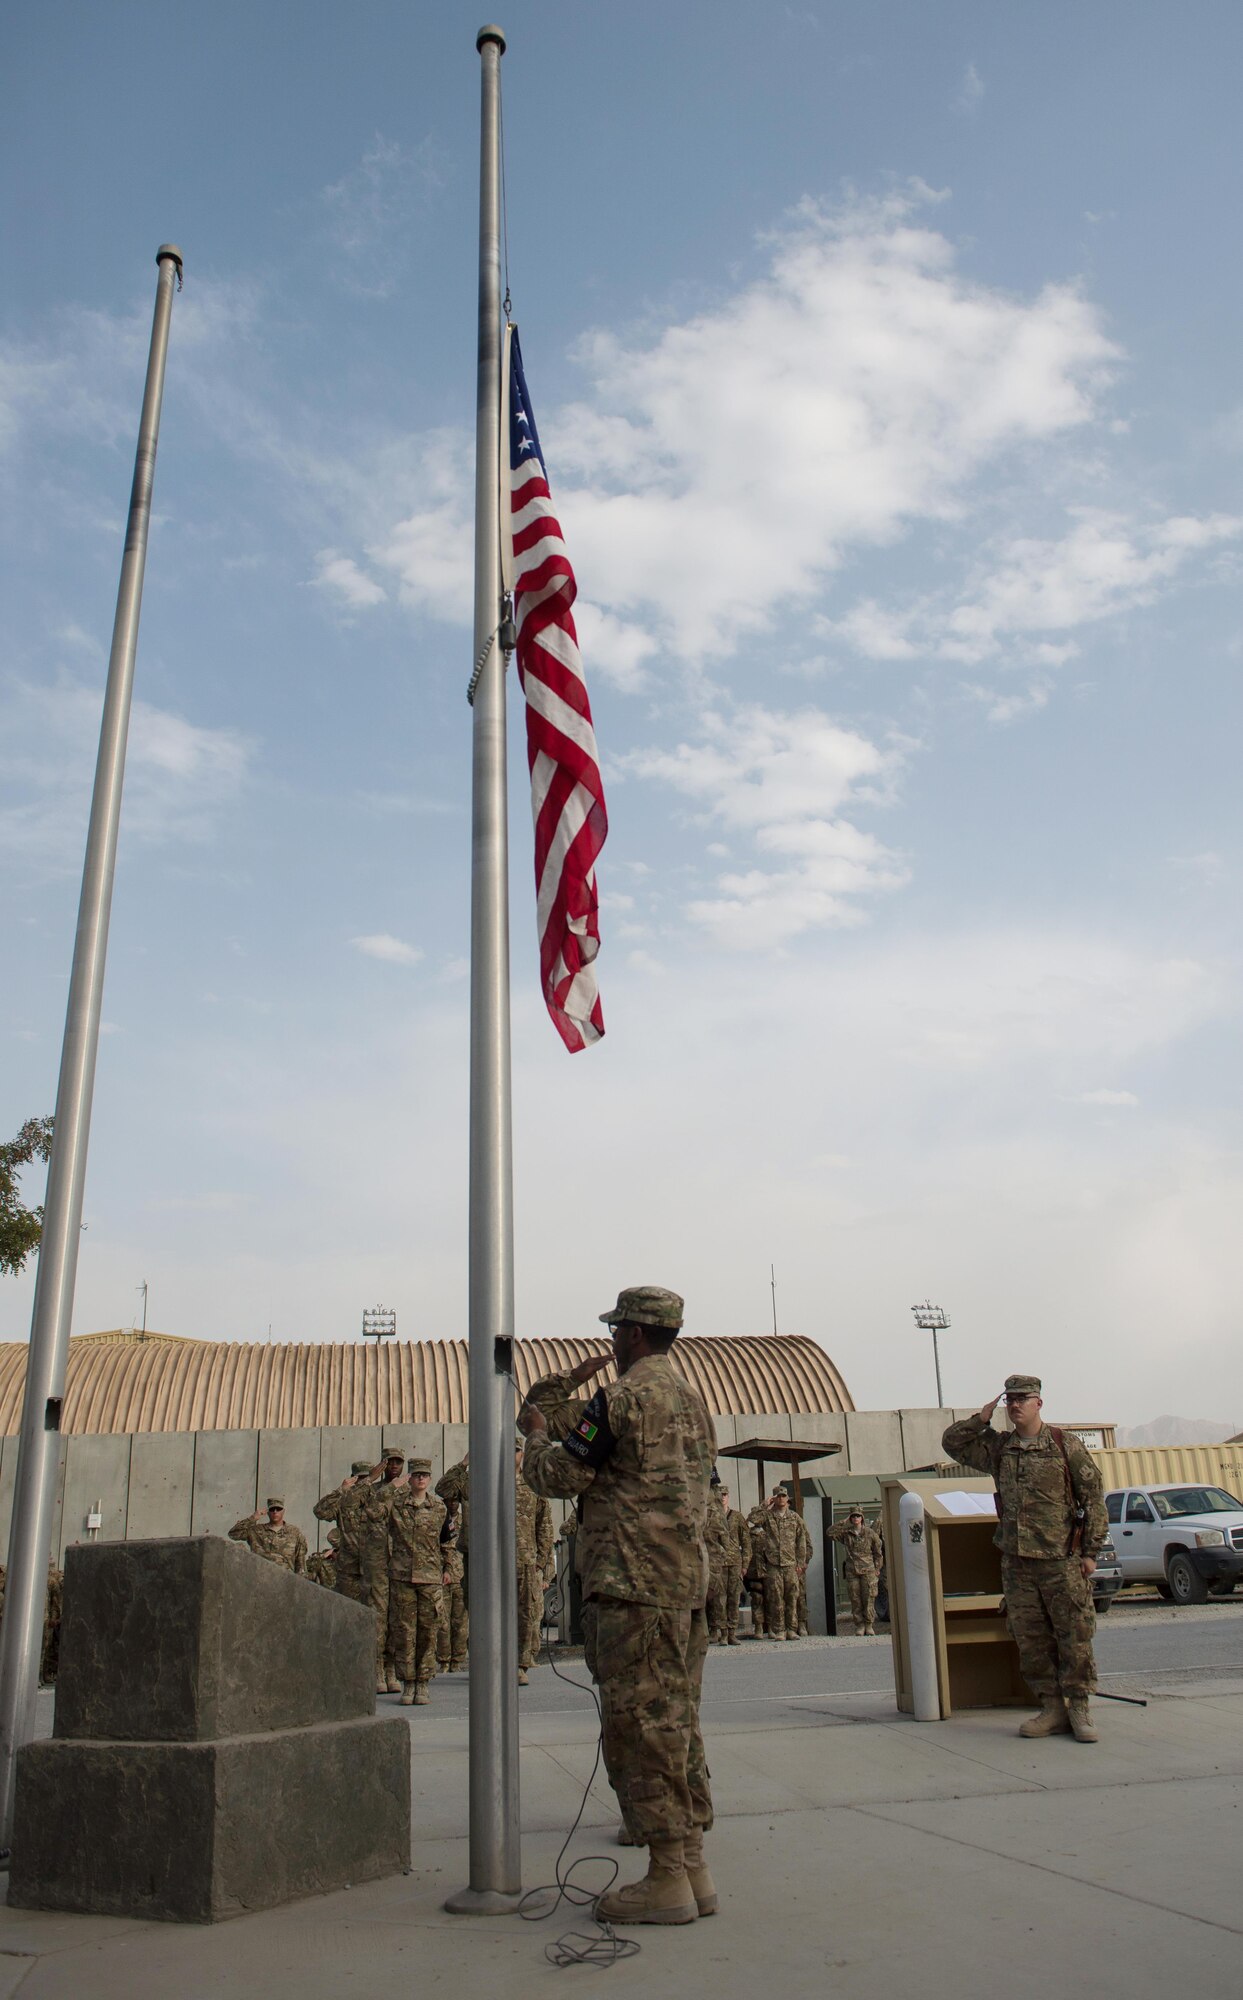 U.S. Airmen with the Bagram Airfield Honor Guard lower the U.S. Flag during the Prisoners Of War, Missing In Action Remembrance and Retreat Ceremony at BAF, Afghanistan, Sept. 17, 2015. The ceremony was in honor of National POW/MIA Remembrance Day, which is observed annually in the United States on the third Friday of September. (U.S. Air Force photo by Tech. Sgt. Joseph Swafford/Released)